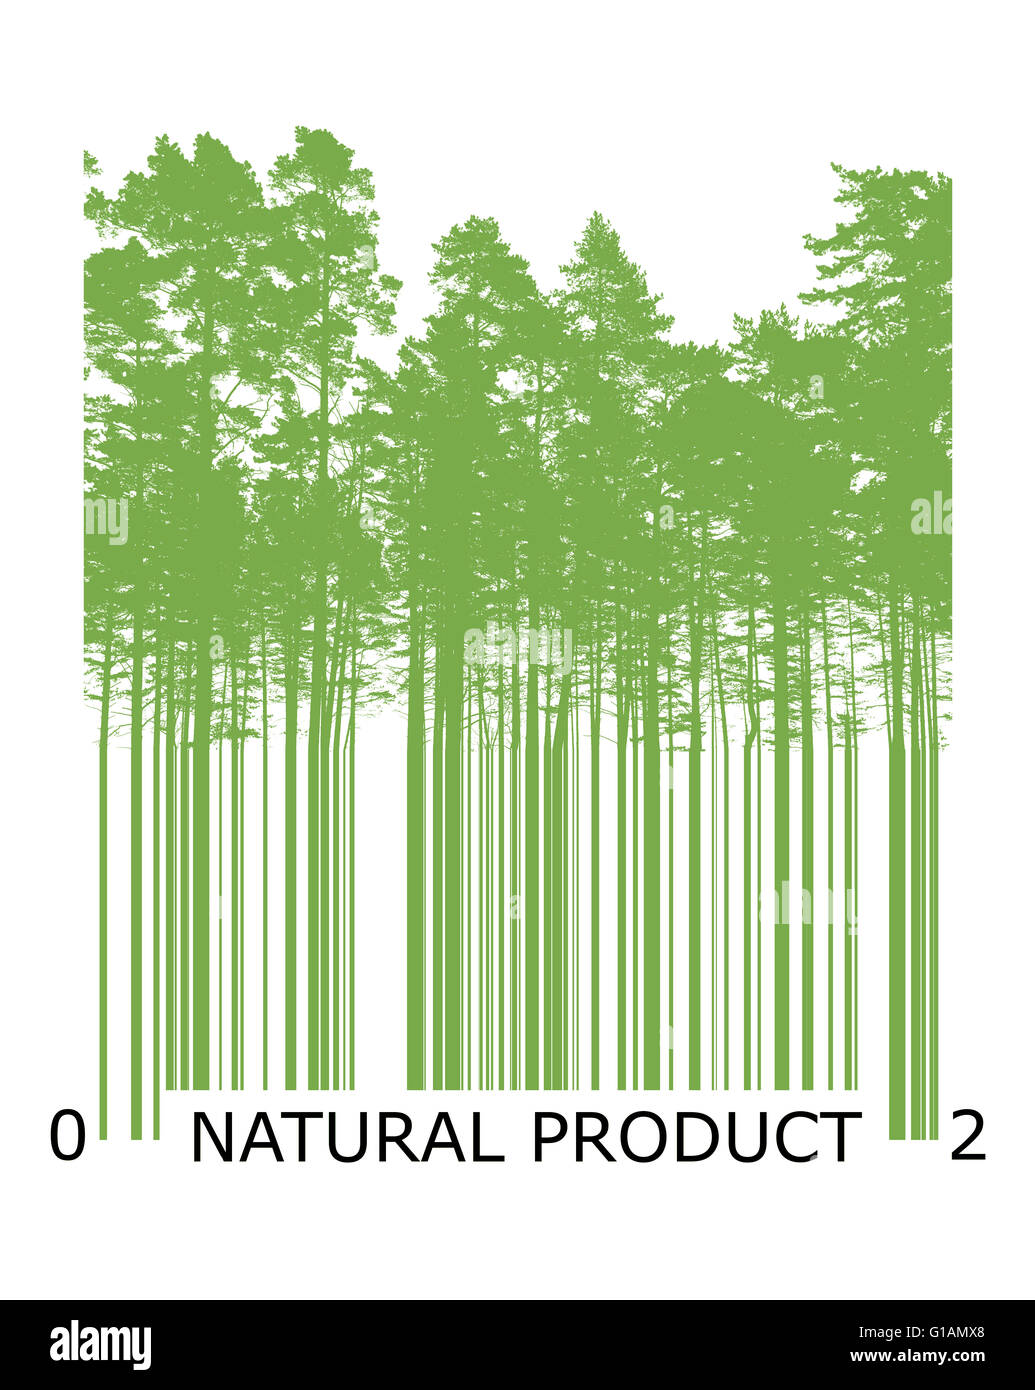 Natural product bar code concept with green trees silhouettes Stock Photo